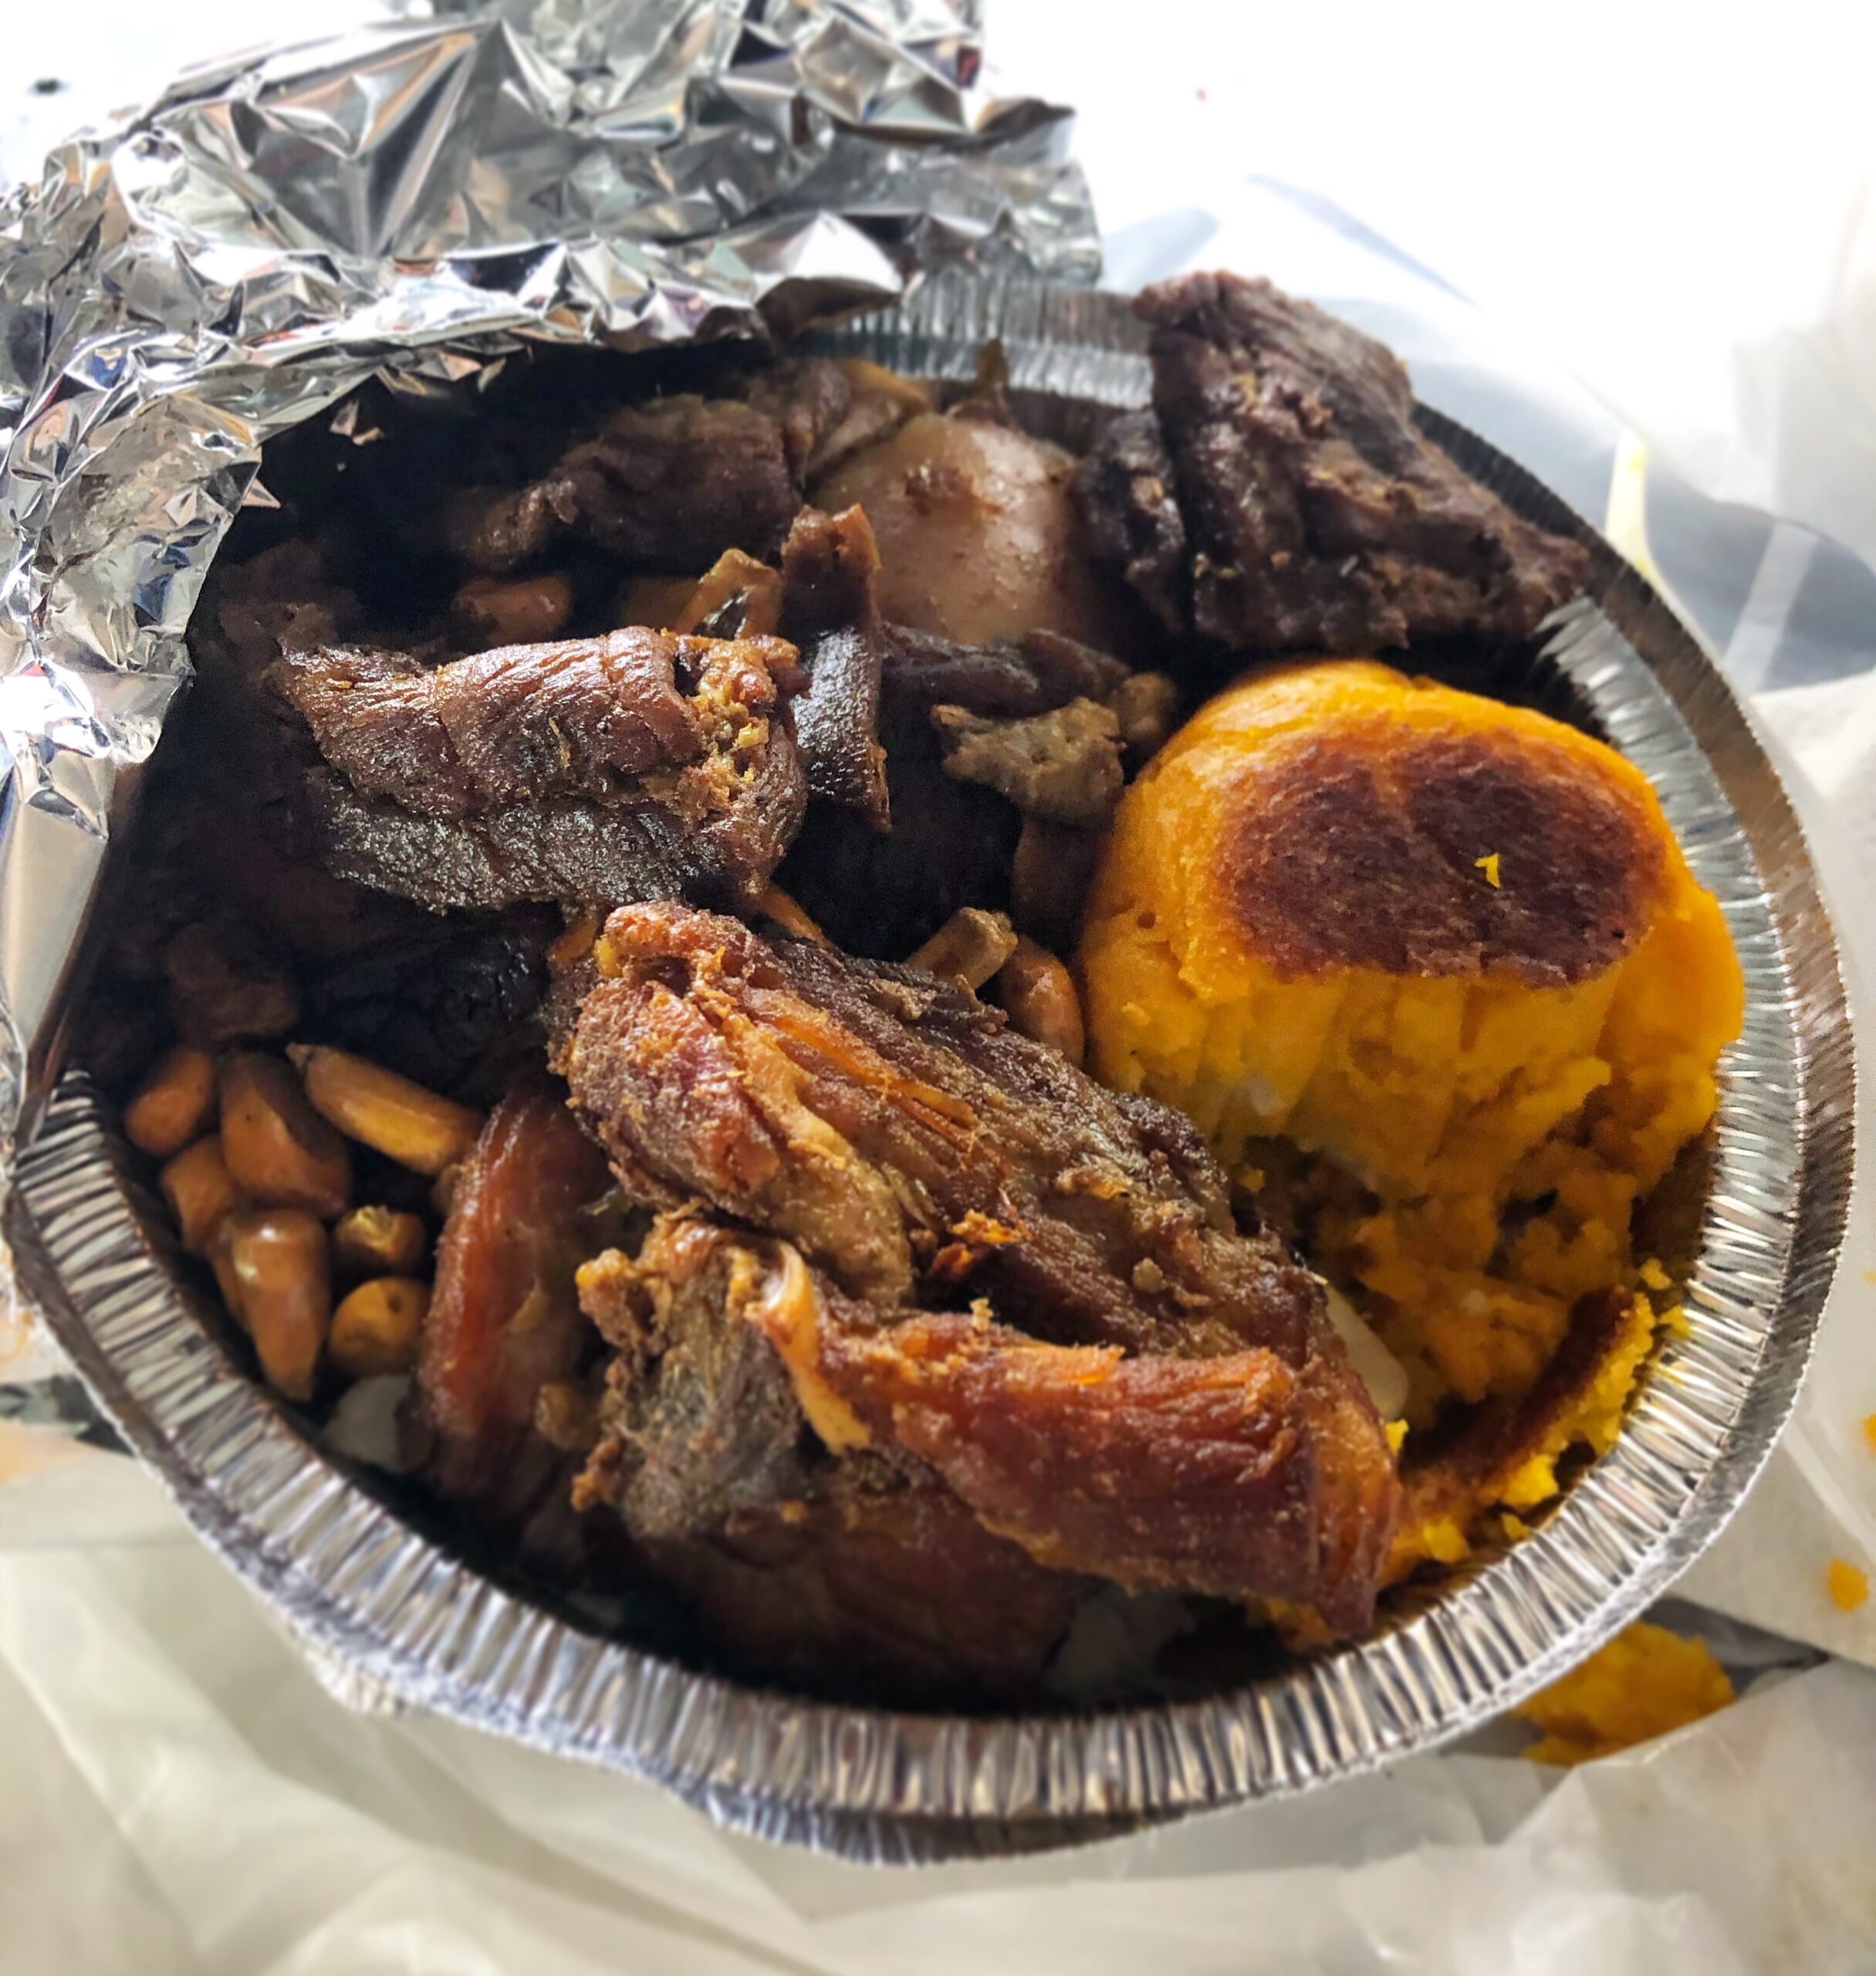 Plate of Ecuadorian Food Made Fresh from Food Cart in Queens